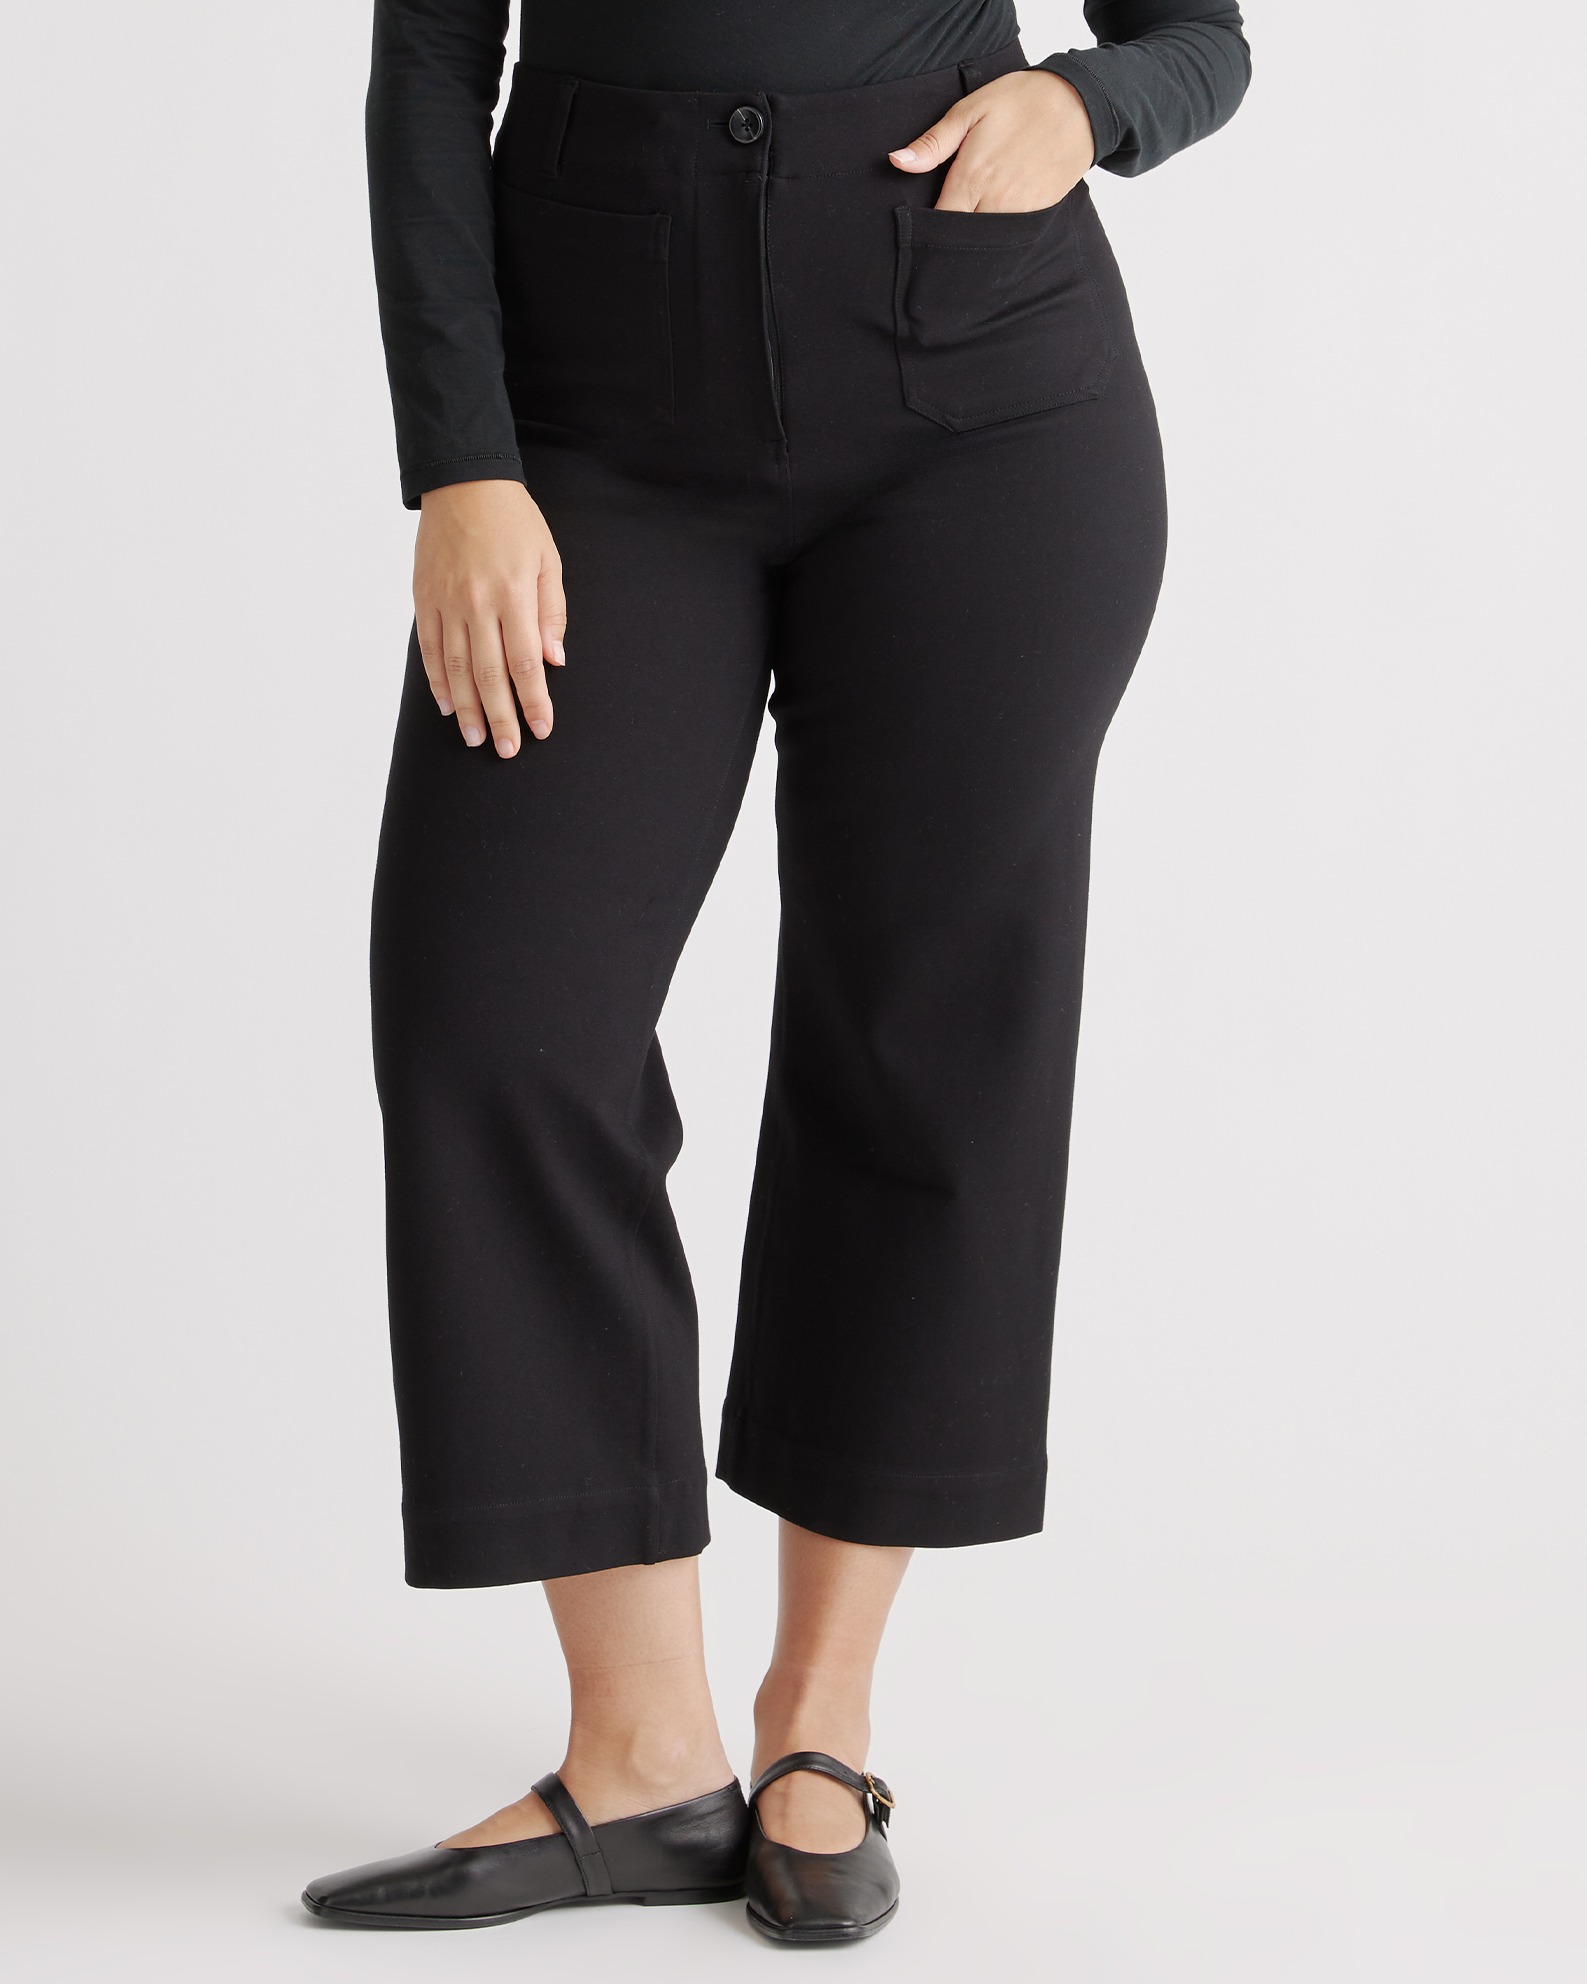 Albemarle Cropped Trousers - Black | Boden UK